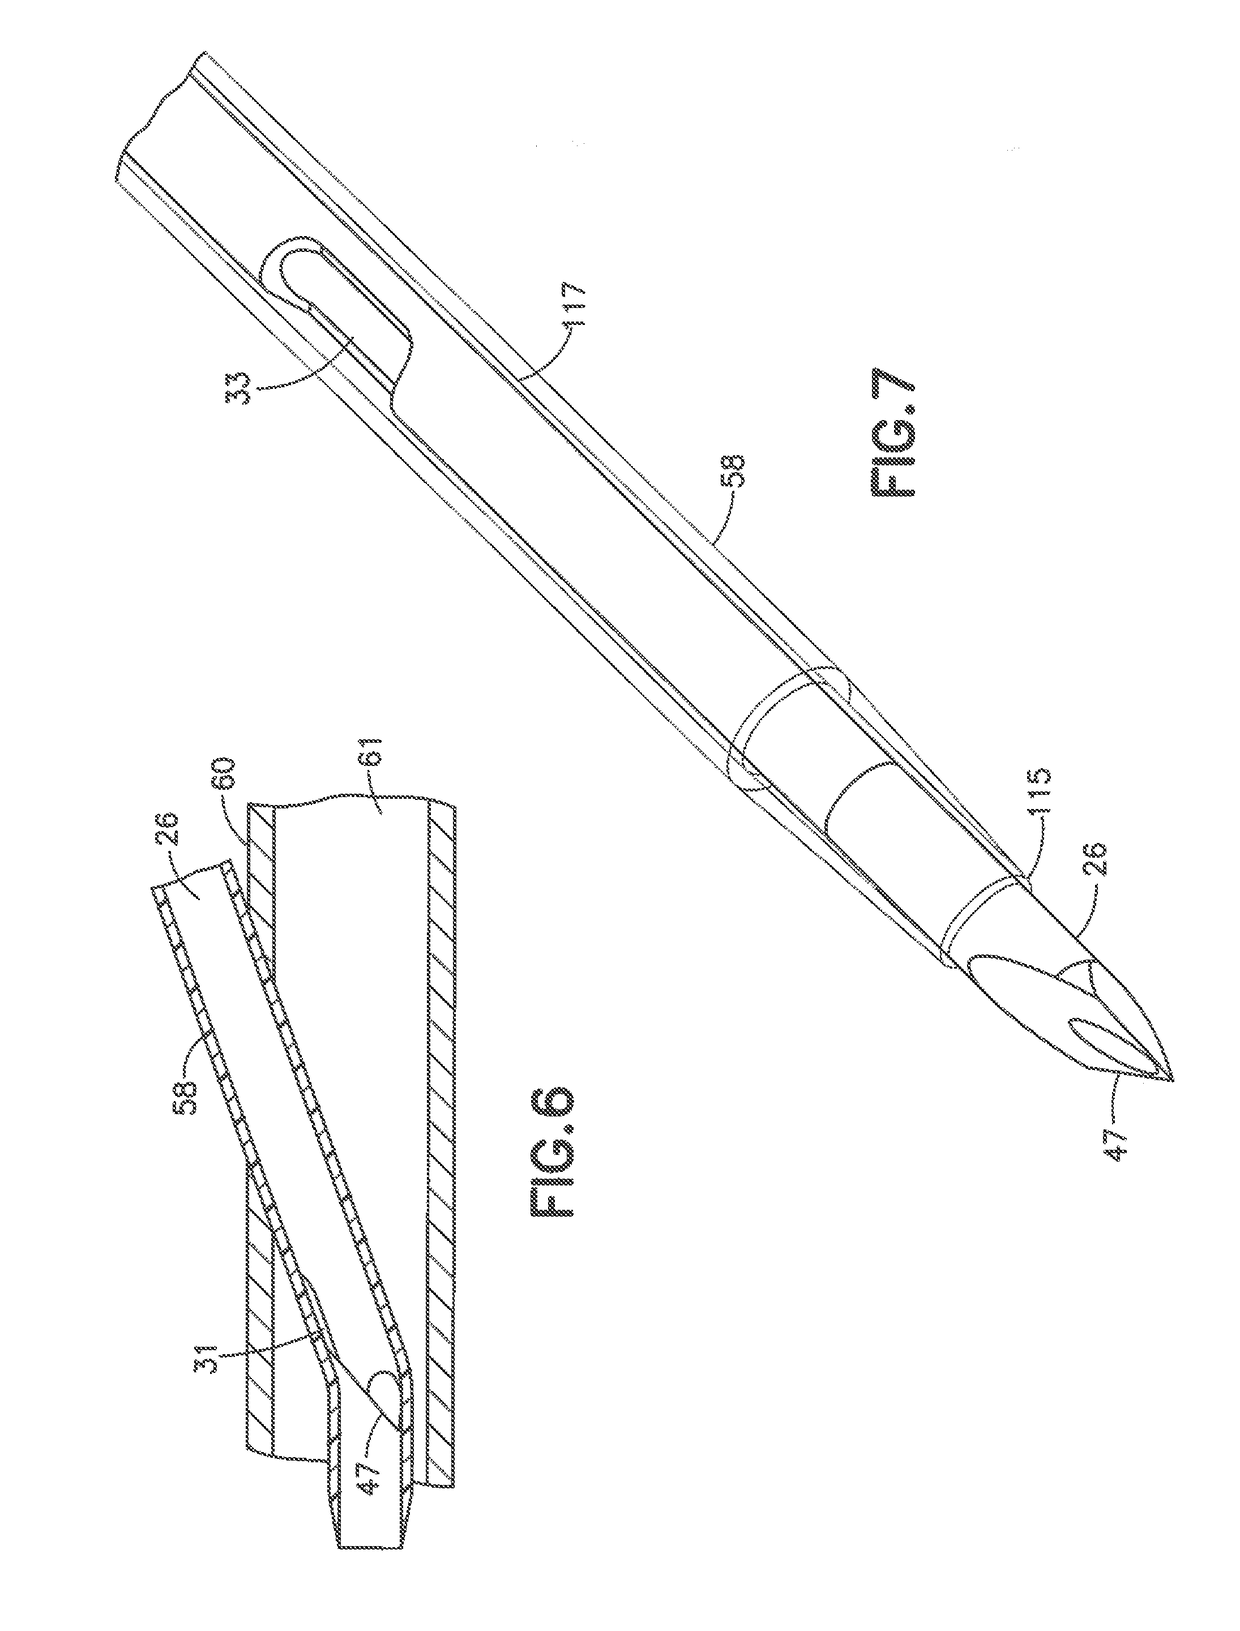 Needle and catheter insertion device